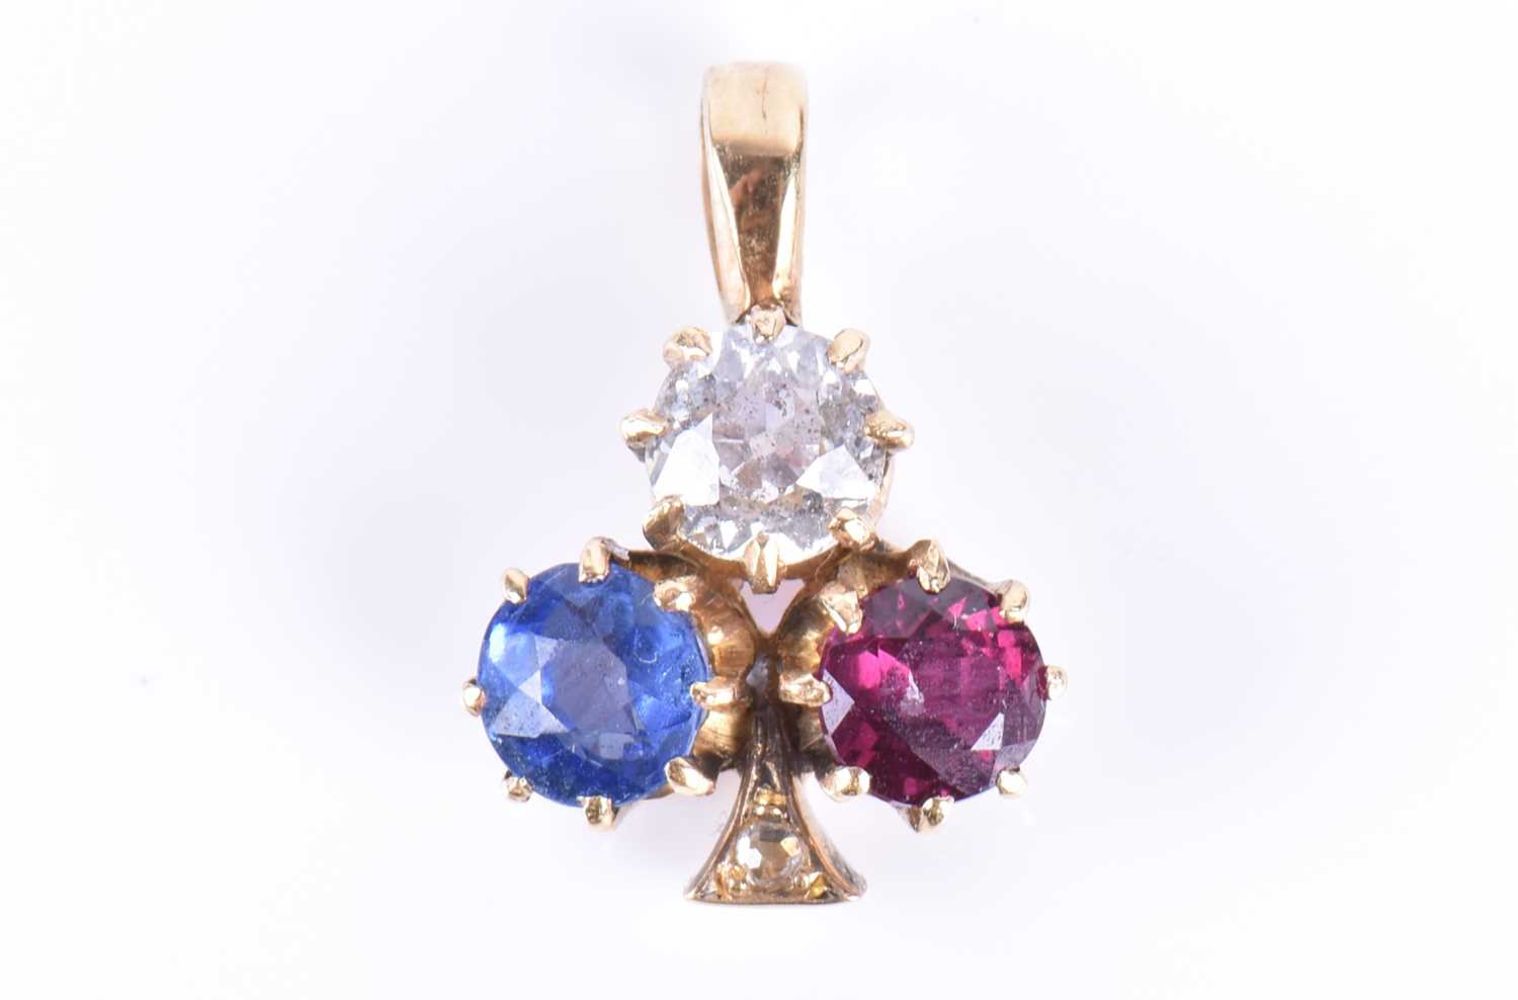 The May Sale | Jewellery, Fine Art & Antiques